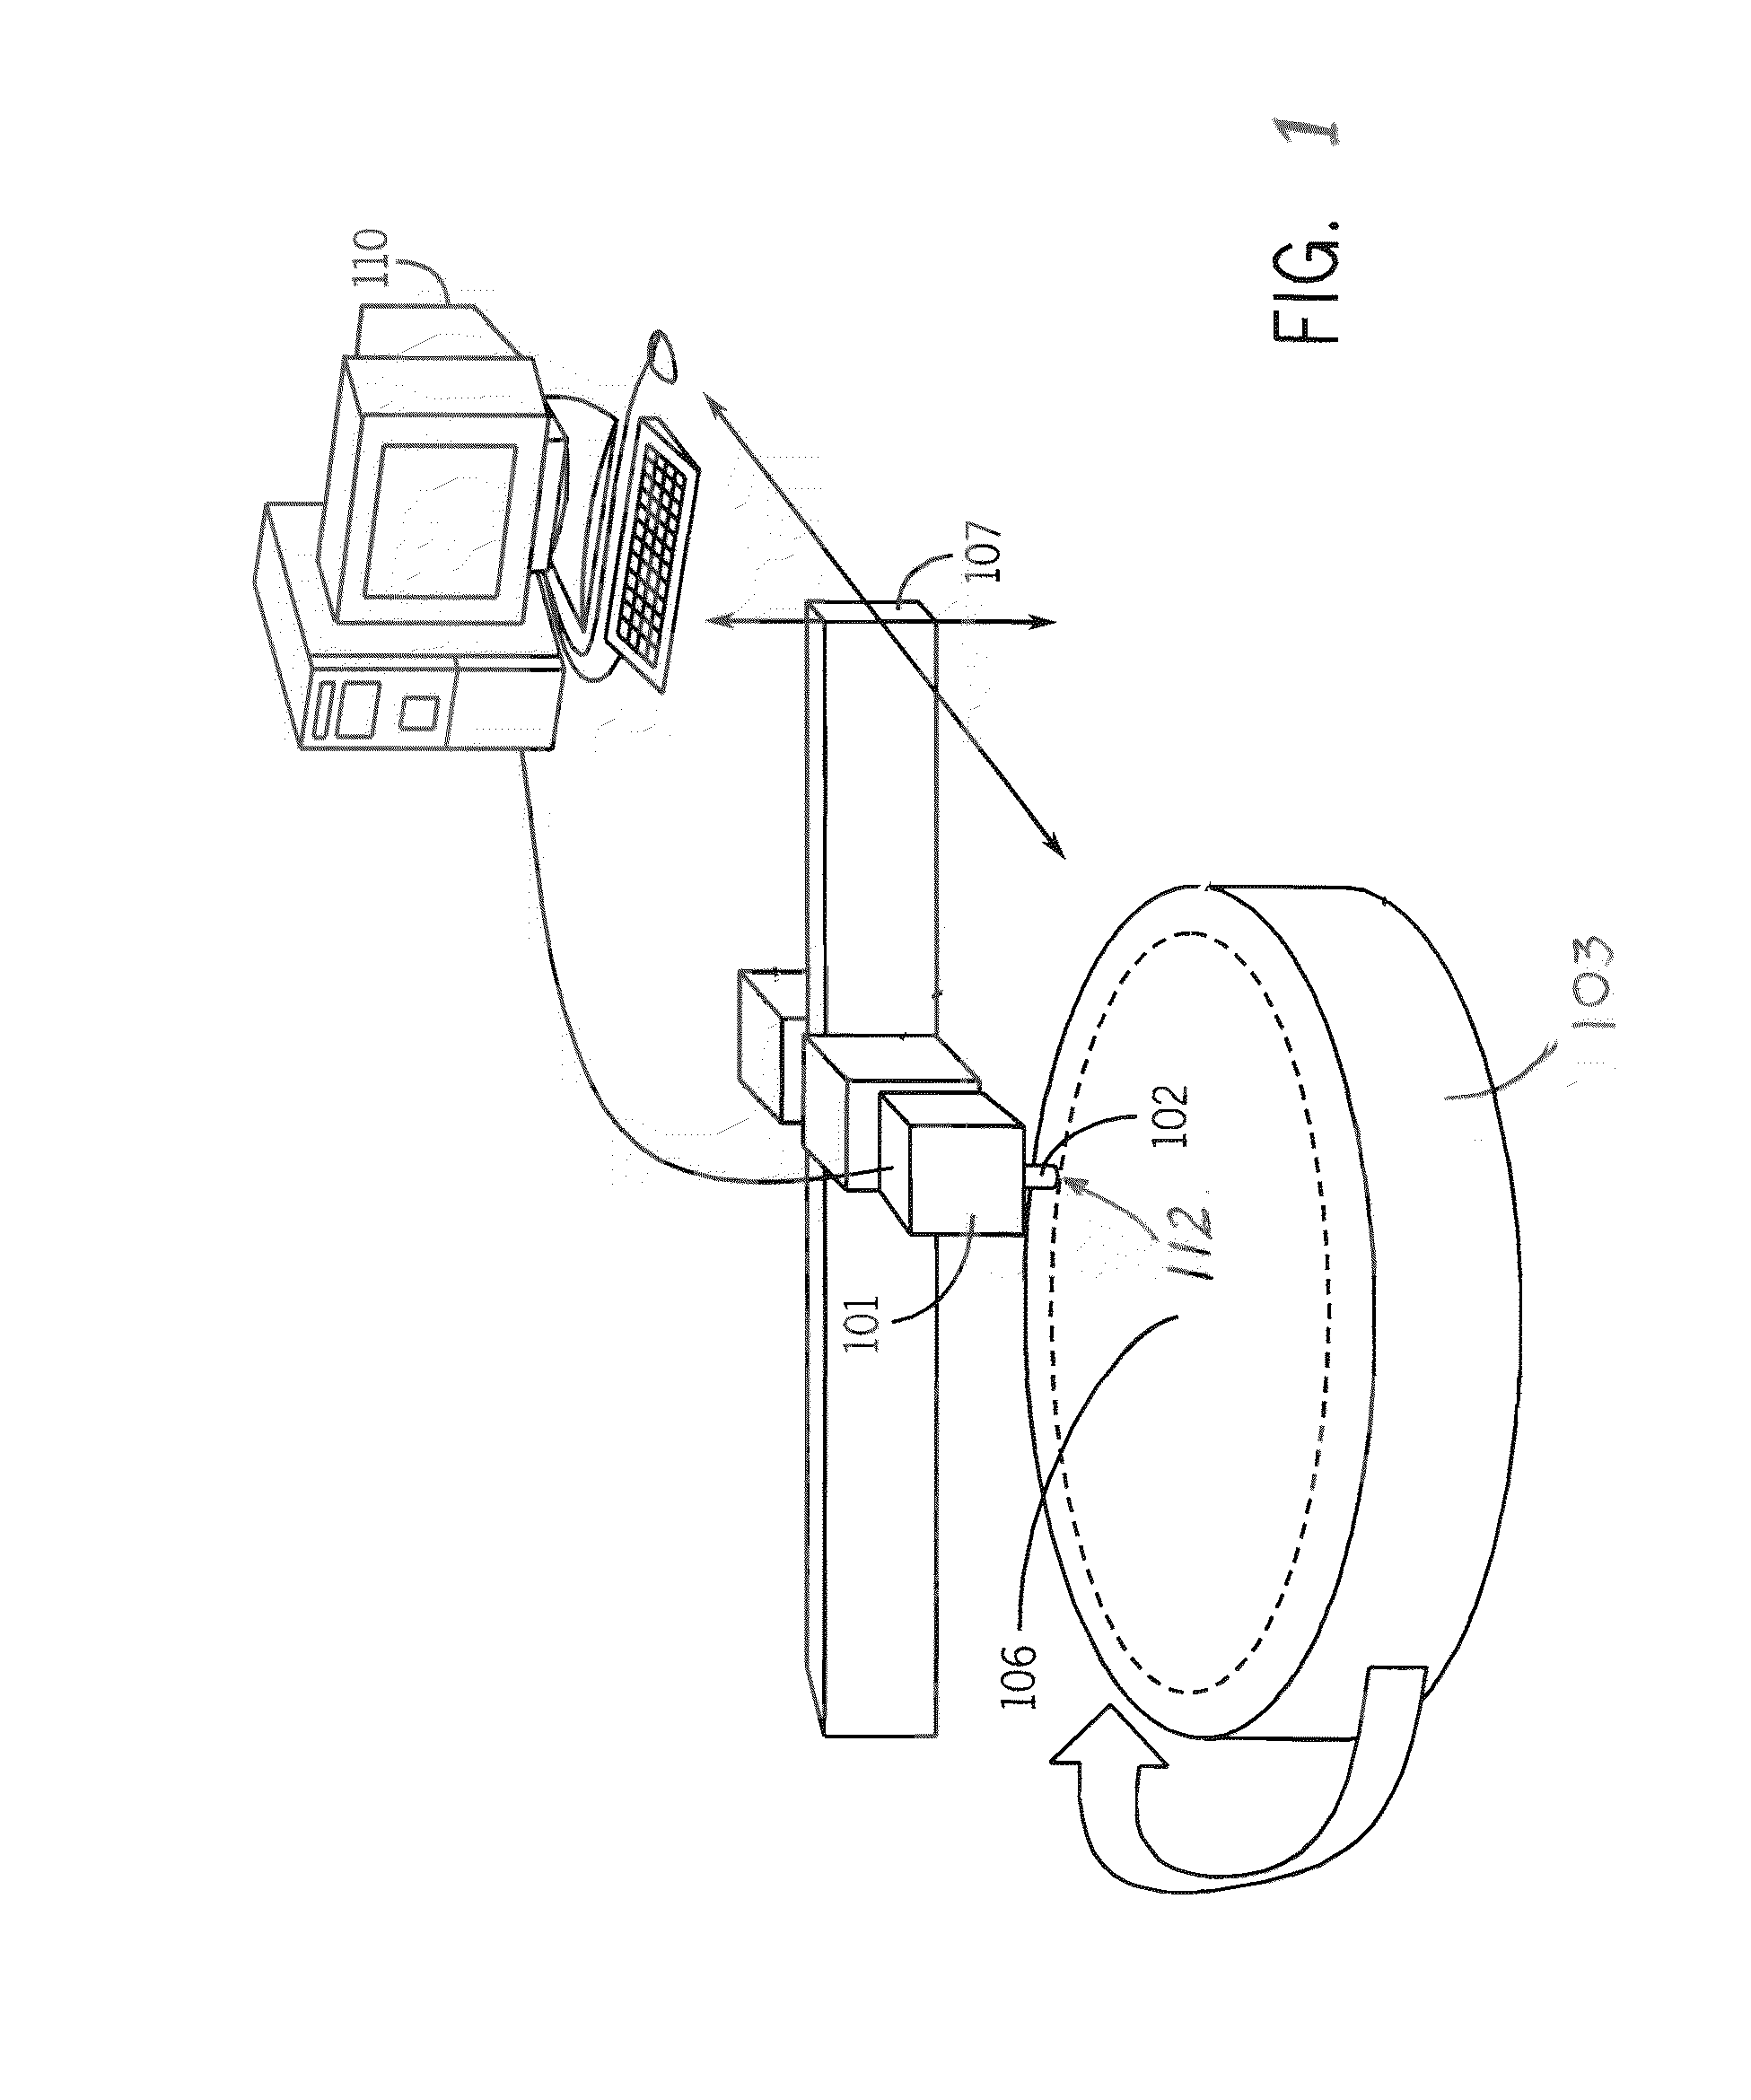 Patterned wafer inspection system using a non-vibrating contact potential difference sensor